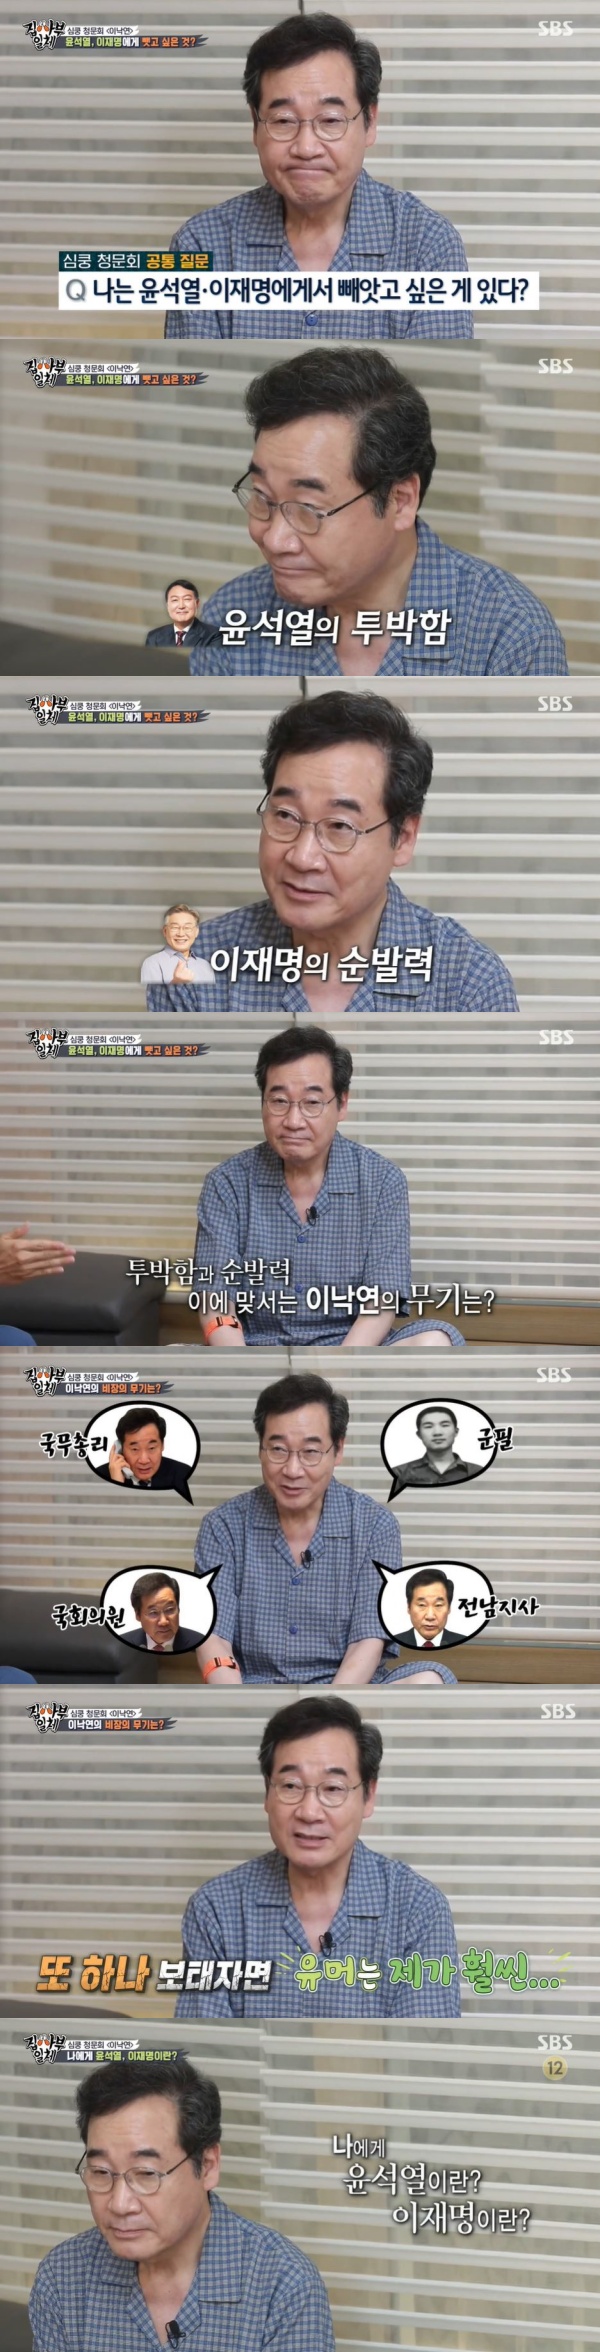 Lee Nak-yeon, who appeared in the presidential candidate BIG 3 special feature, was portrayed in the SBS entertainment program All The Butlers, which aired on the 3rd.Former leader Lee Nak-yeon has been in a Simkung hearing.Im Lee Nak-yeon, is there anything you want to take away from Yoon Seok-ryul and Lee Jae-myung? asked Yoo Soo-bin.It is the ruggedness of Mr. Yoon Seok-ryul, Lee said. I want to have more is ruggedness. Sometimes I need ruggedness.I want to take away the quickness of Mr. Lee Jae-myung, he added.Lee expressed a better point than Yoon Seok-ryul and Lee Jae-myung.I had a lot of experience (better than Yoon Seok-ryul and Lee Jae-myung), he said, luckily.Lee said, I have experienced the government, the National Assembly, the central government and the local government, the internal affairs and diplomacy, and the military there. Another addition, humor is much better for me. Lee said, Yoon Seok-ryul is the one who gave me a big homework to the Moon Jae-in government.Lee Jae-myung is the one who keeps giving future homework, he added.Meanwhile, All The Butlers is a life tutoring entertainment program with youths full of question marks and myway geek masters.It airs every Sunday at 6:25 p.m.Photo SBS broadcast screen capture